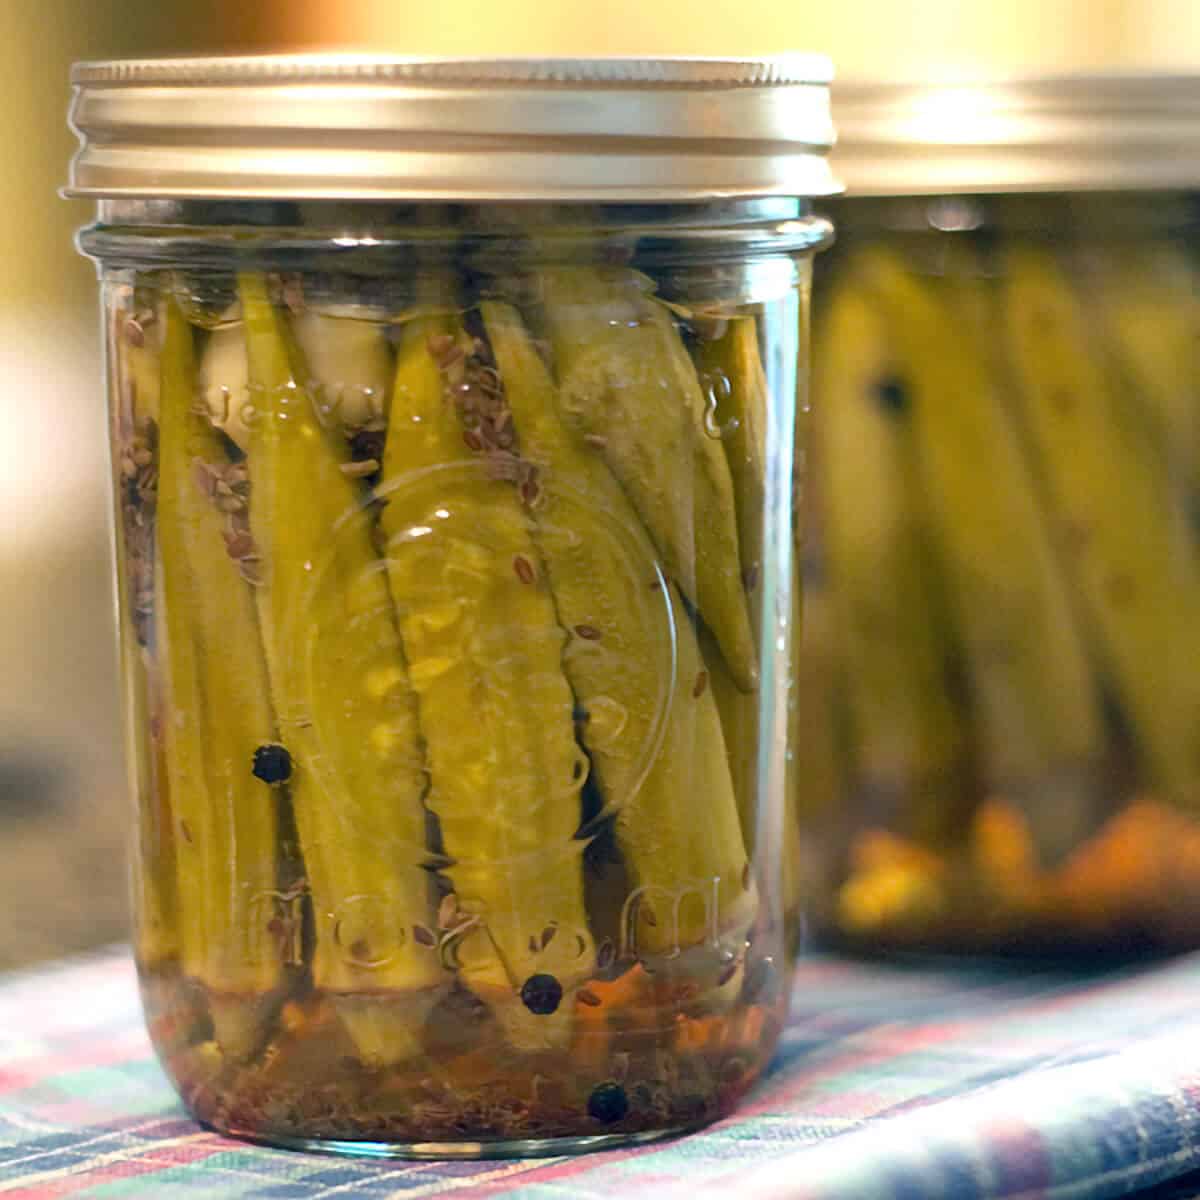 Canning jars filled with homemade pickled okra.